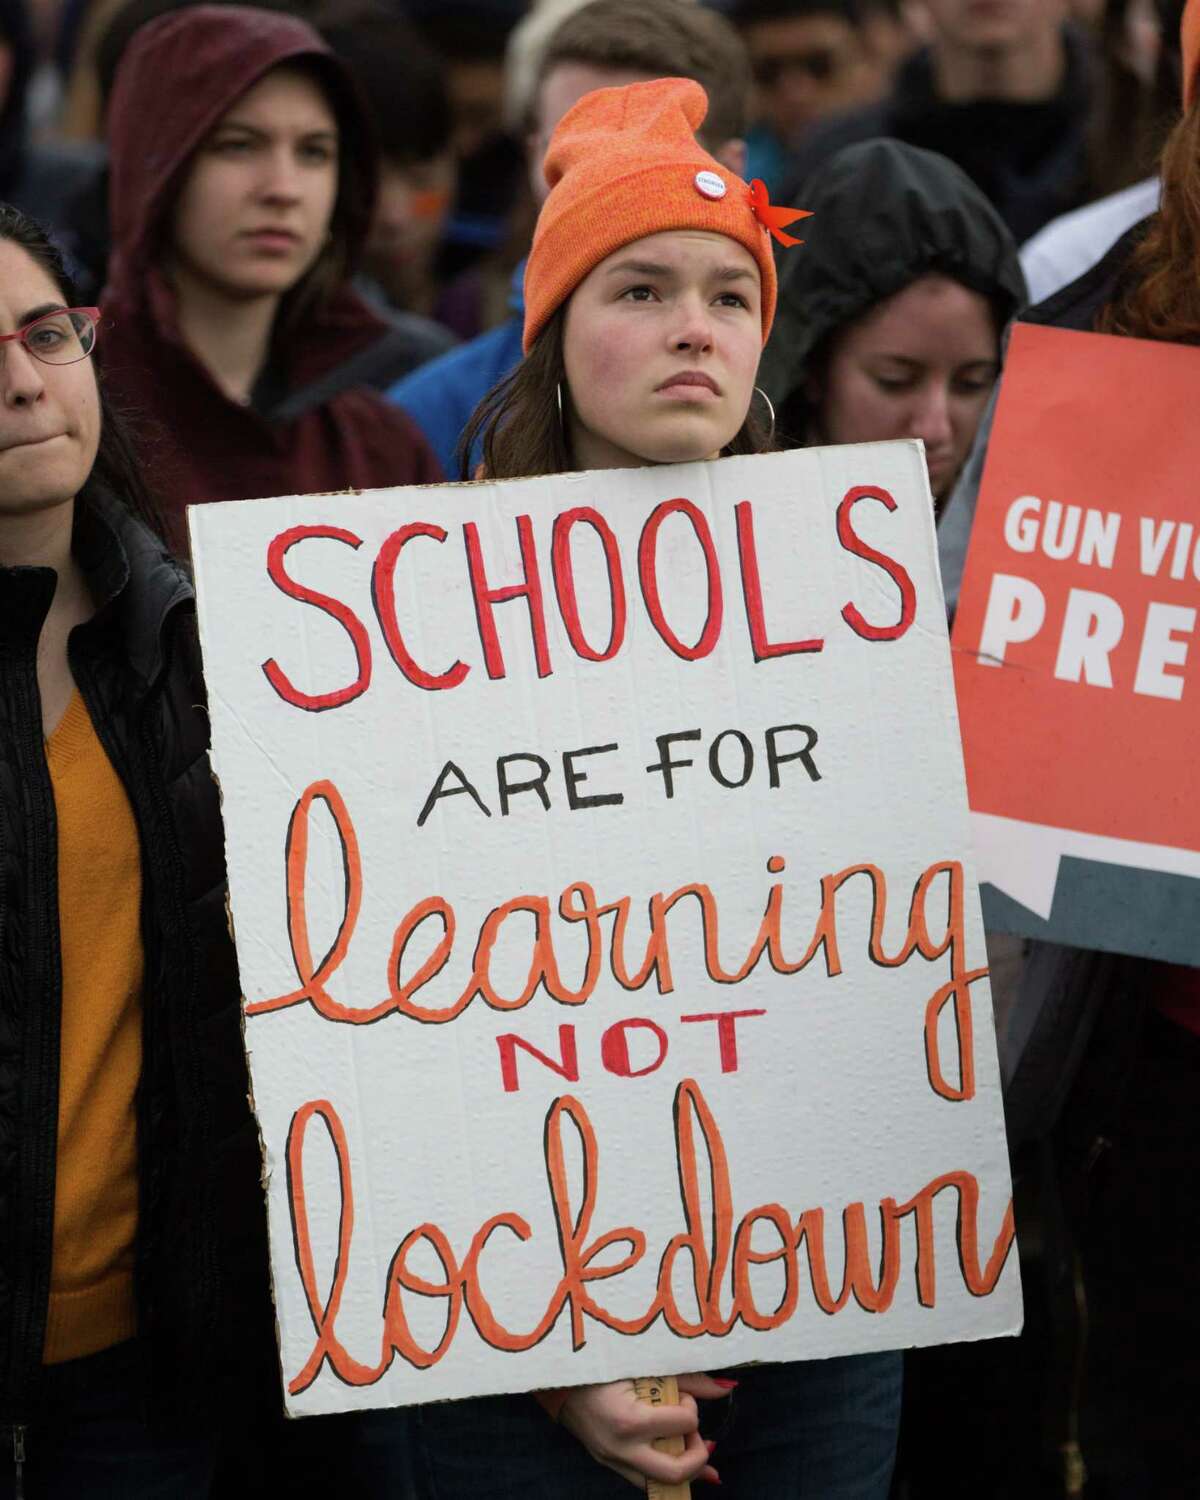 Students from Ingraham and Lakeside high schools listen to speakers while participating in a nationwide student walkout to protest gun violence and advocate for more gun control legislation, on Wednesday, March 14, 2018.